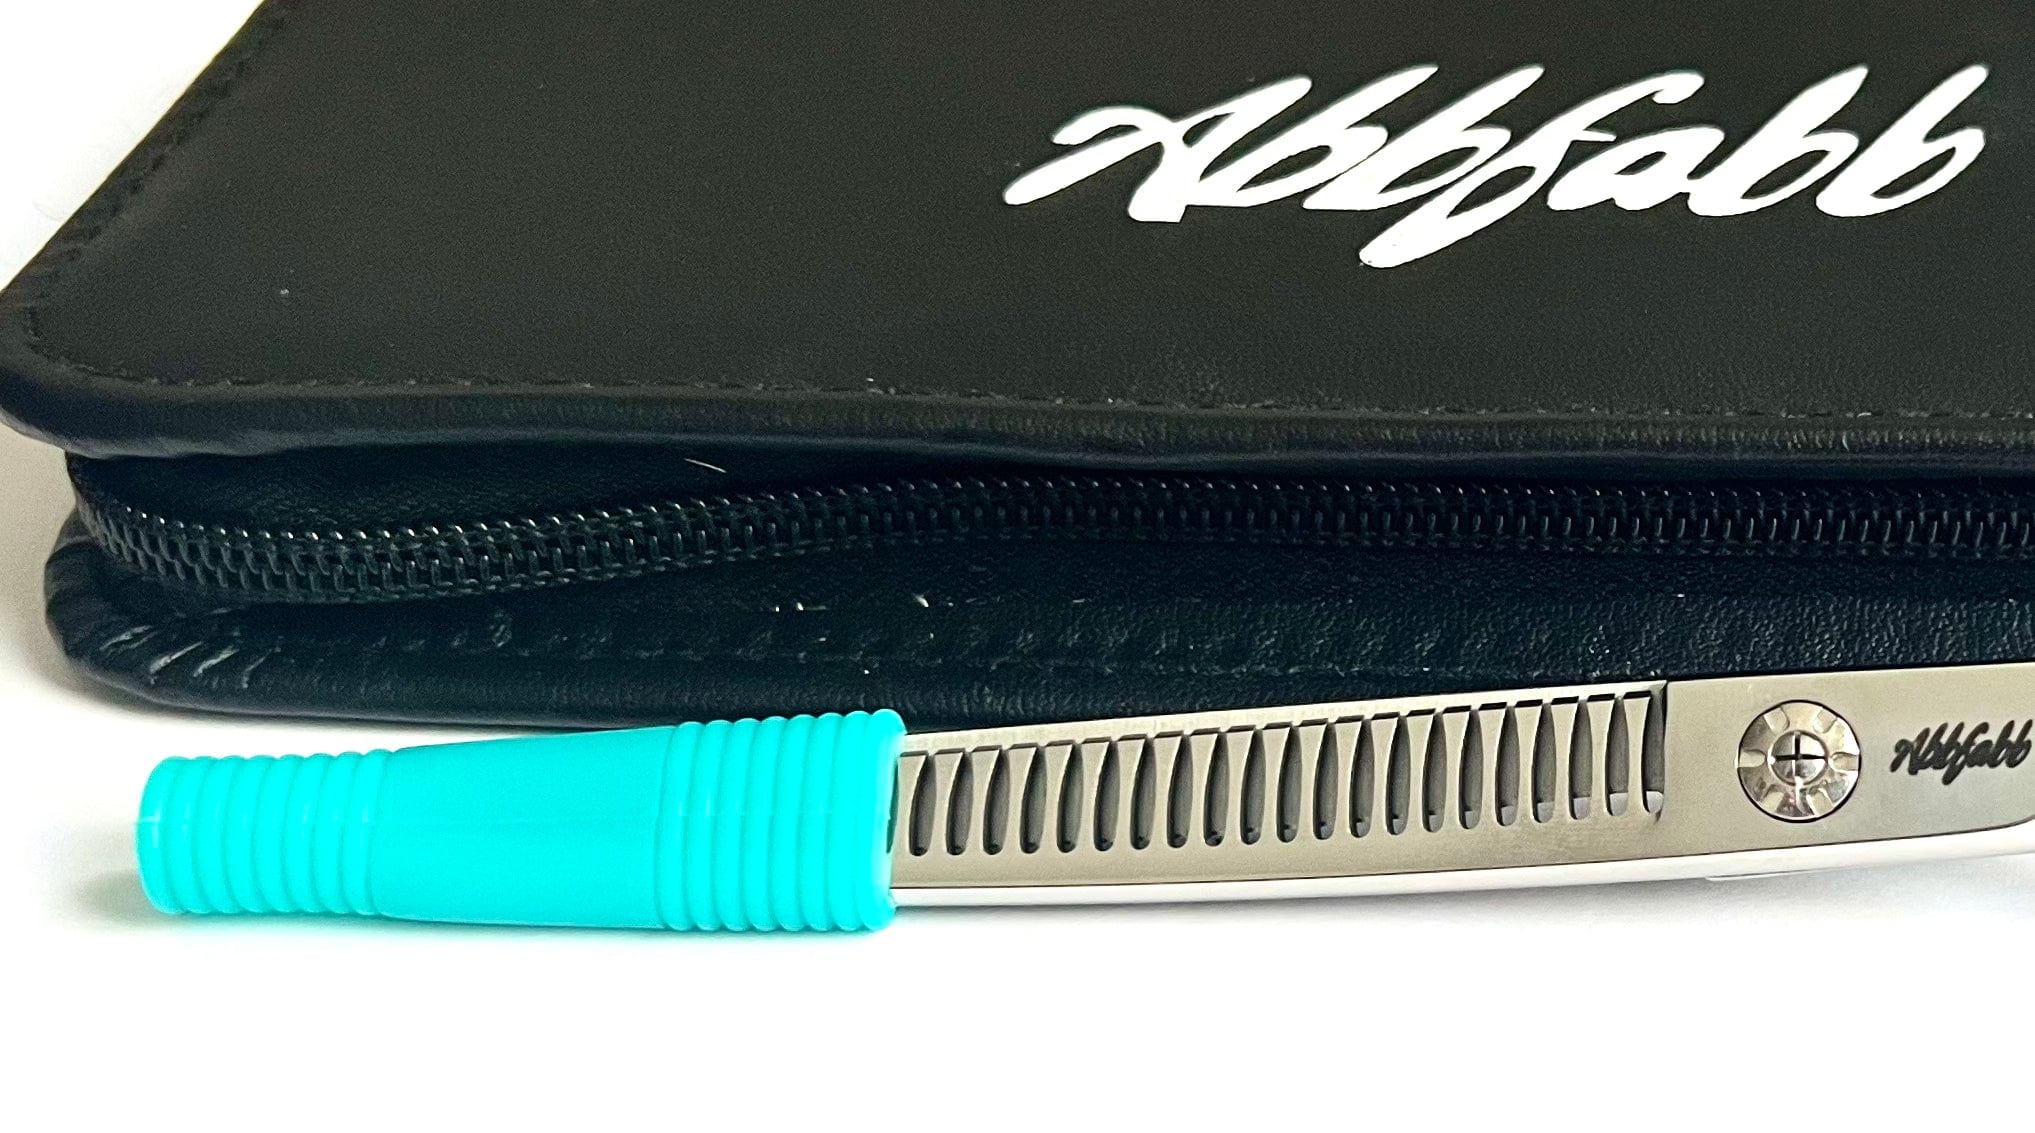 Dog Grooming Scissor Blade and Tip Protector in Turquoise by Abbfabb Grooming Scissors Ltd